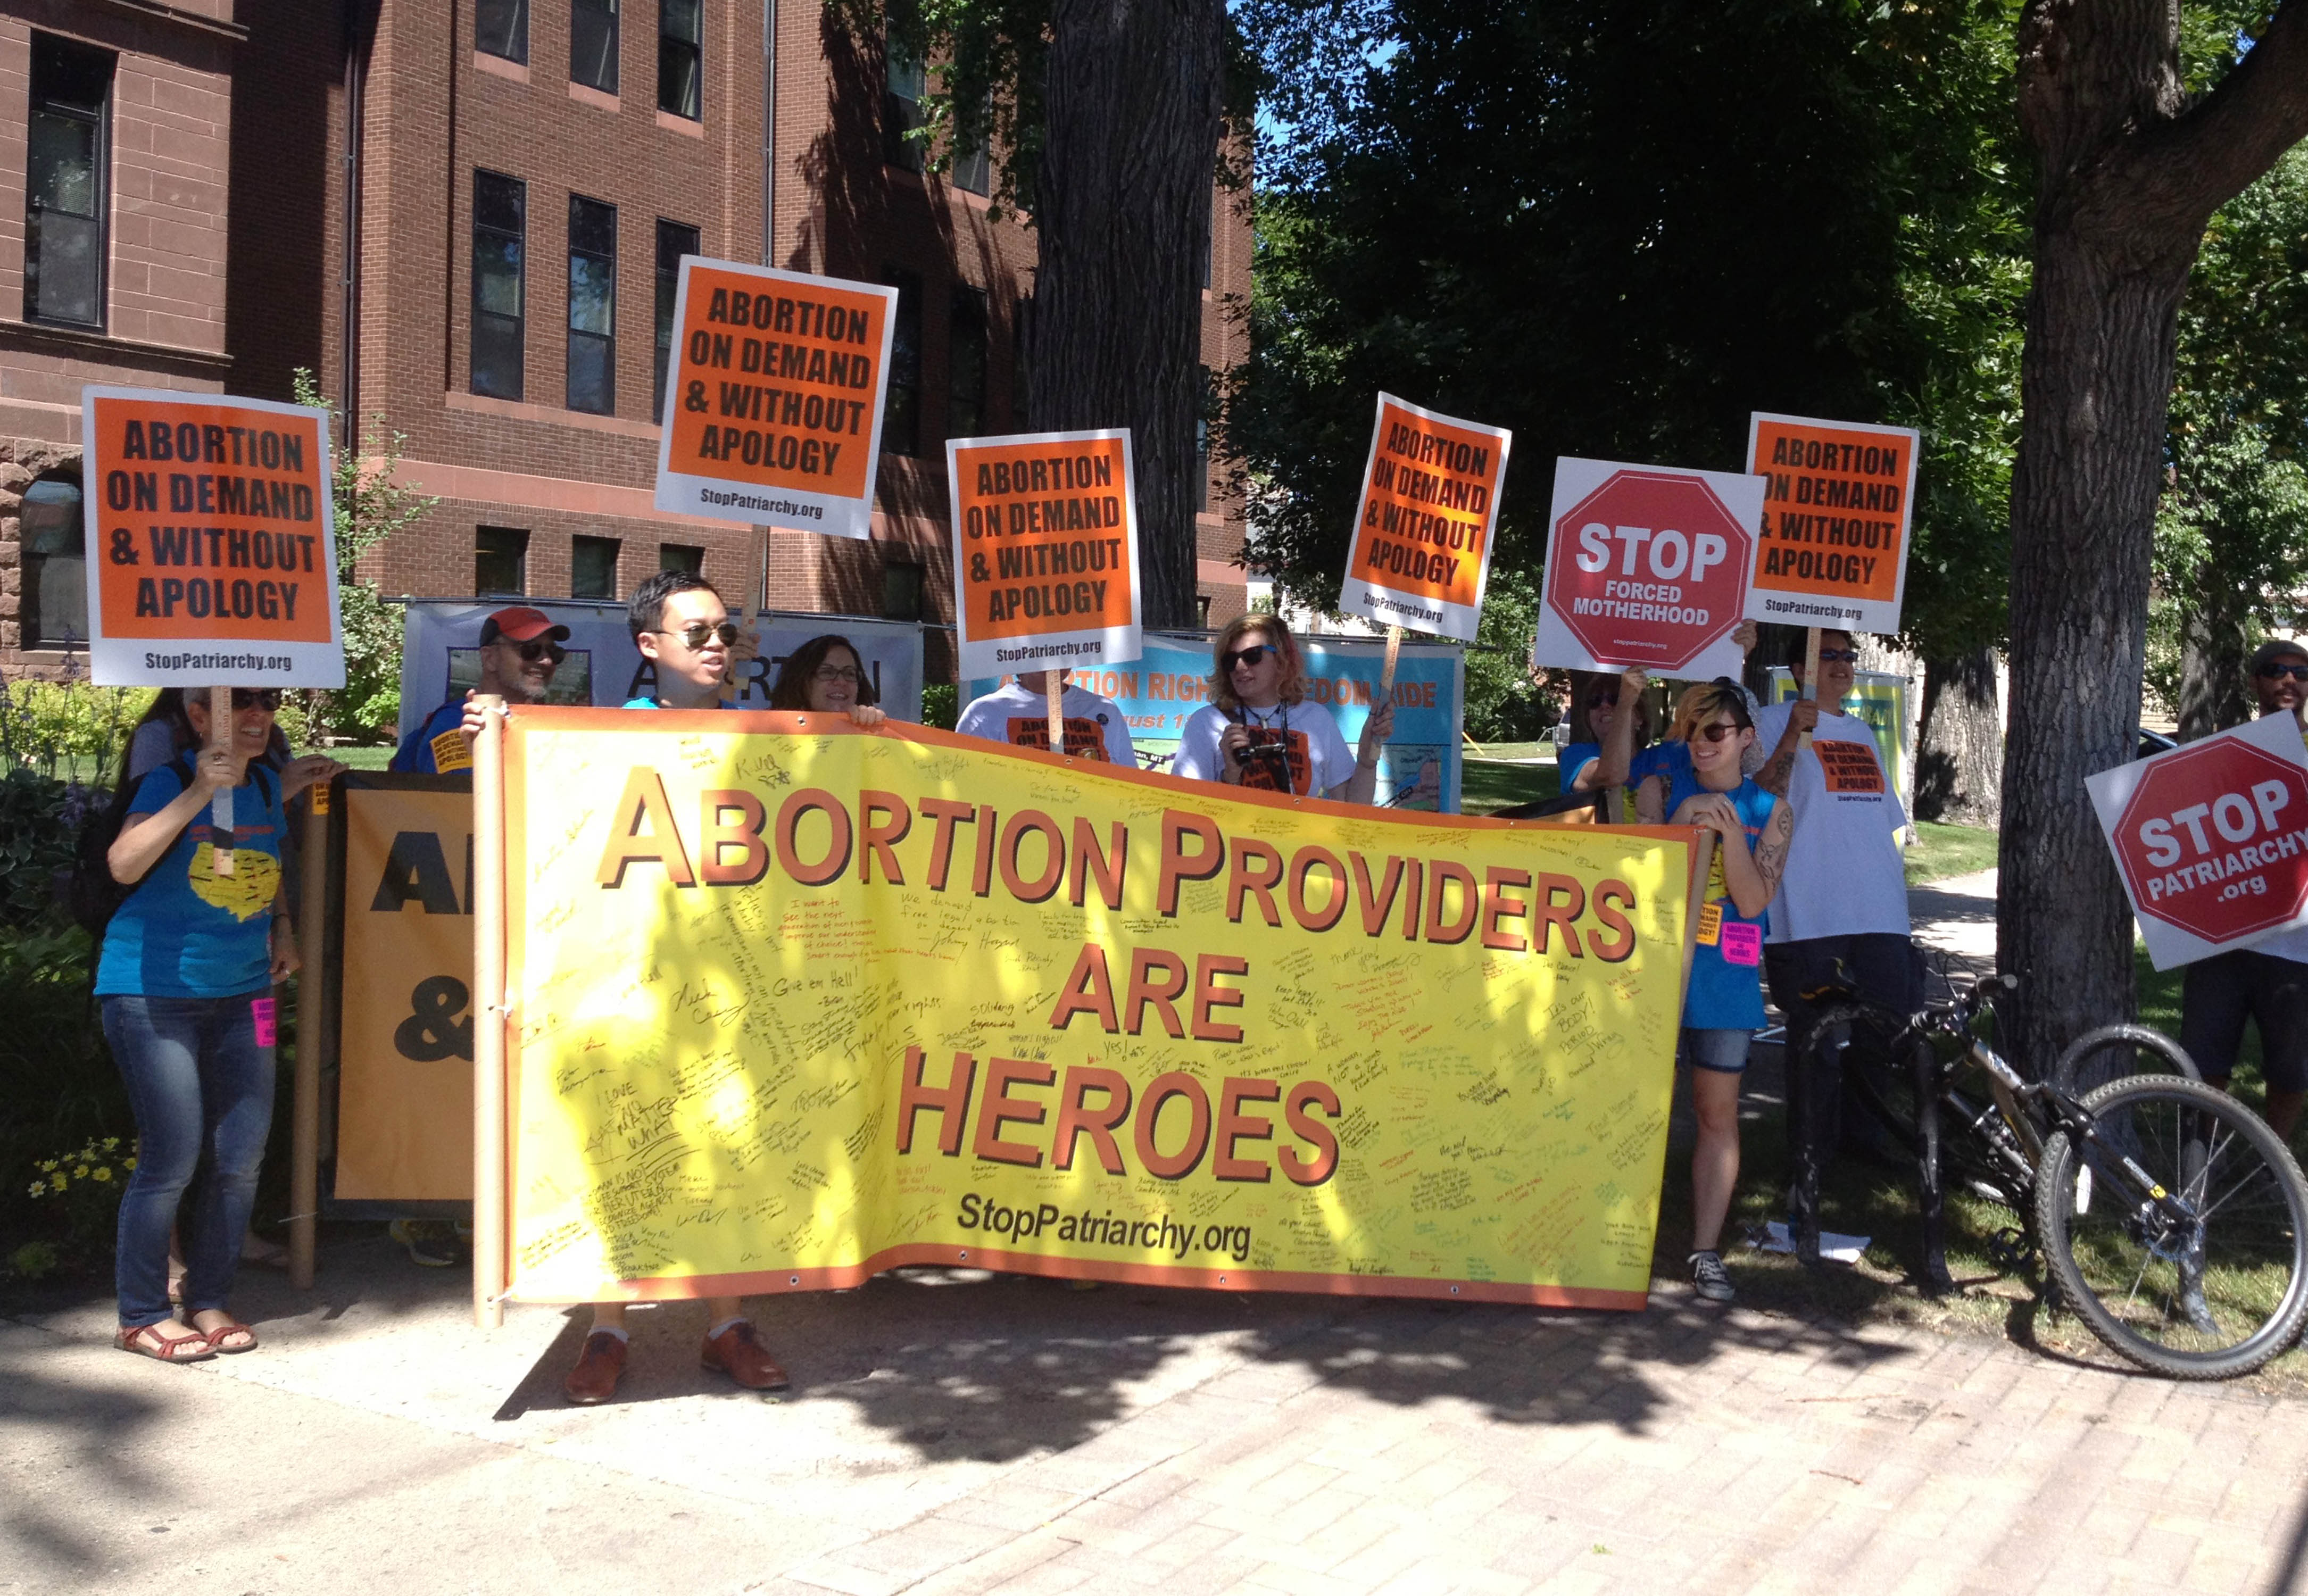 Members of an abortion rights group rally outside the Cass County Courthouse in Fargo, N.D., Wednesday, July 31, 2013. (Dave Kolpack—AP)